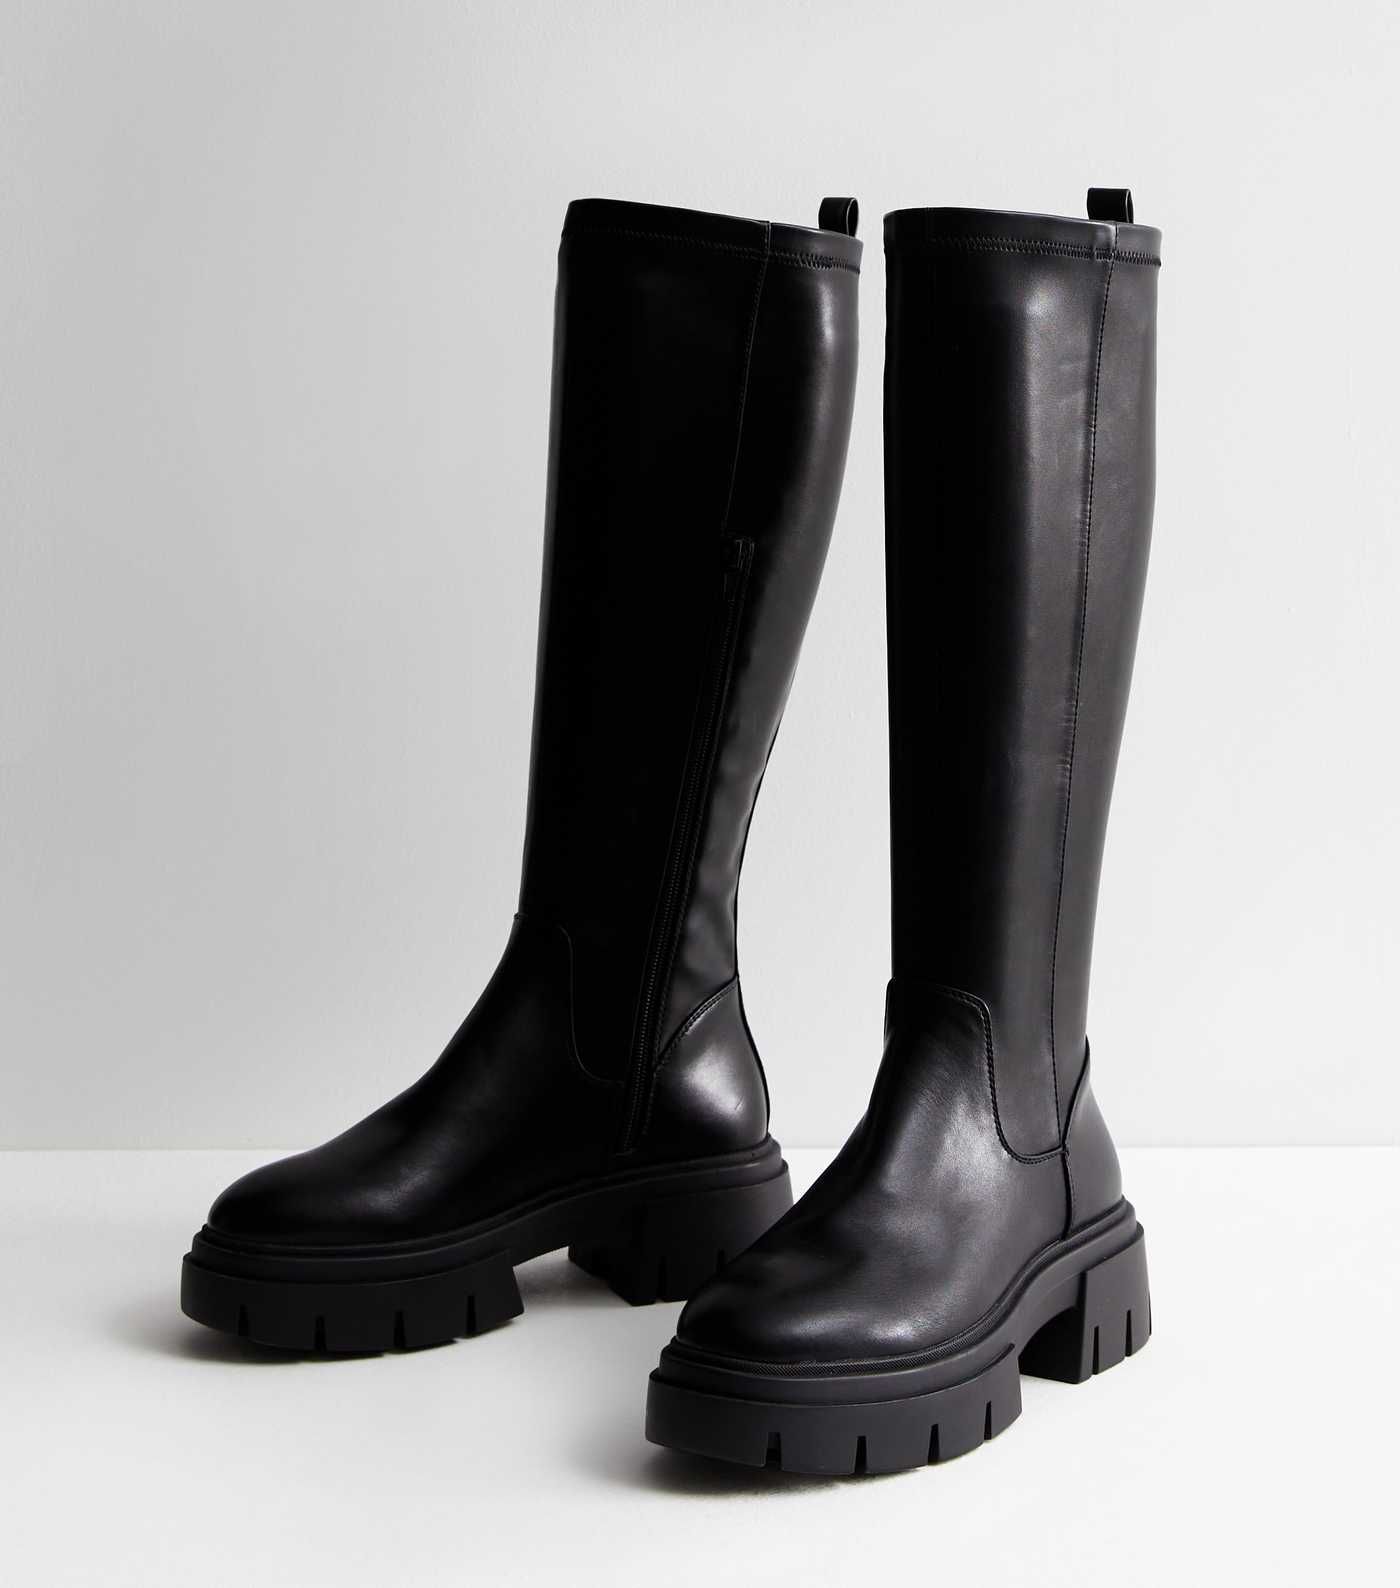 Extra Calf Fit Black Leather-Look Chunky Knee High Boots
						
						Add to Saved Items
						Re... | New Look (UK)